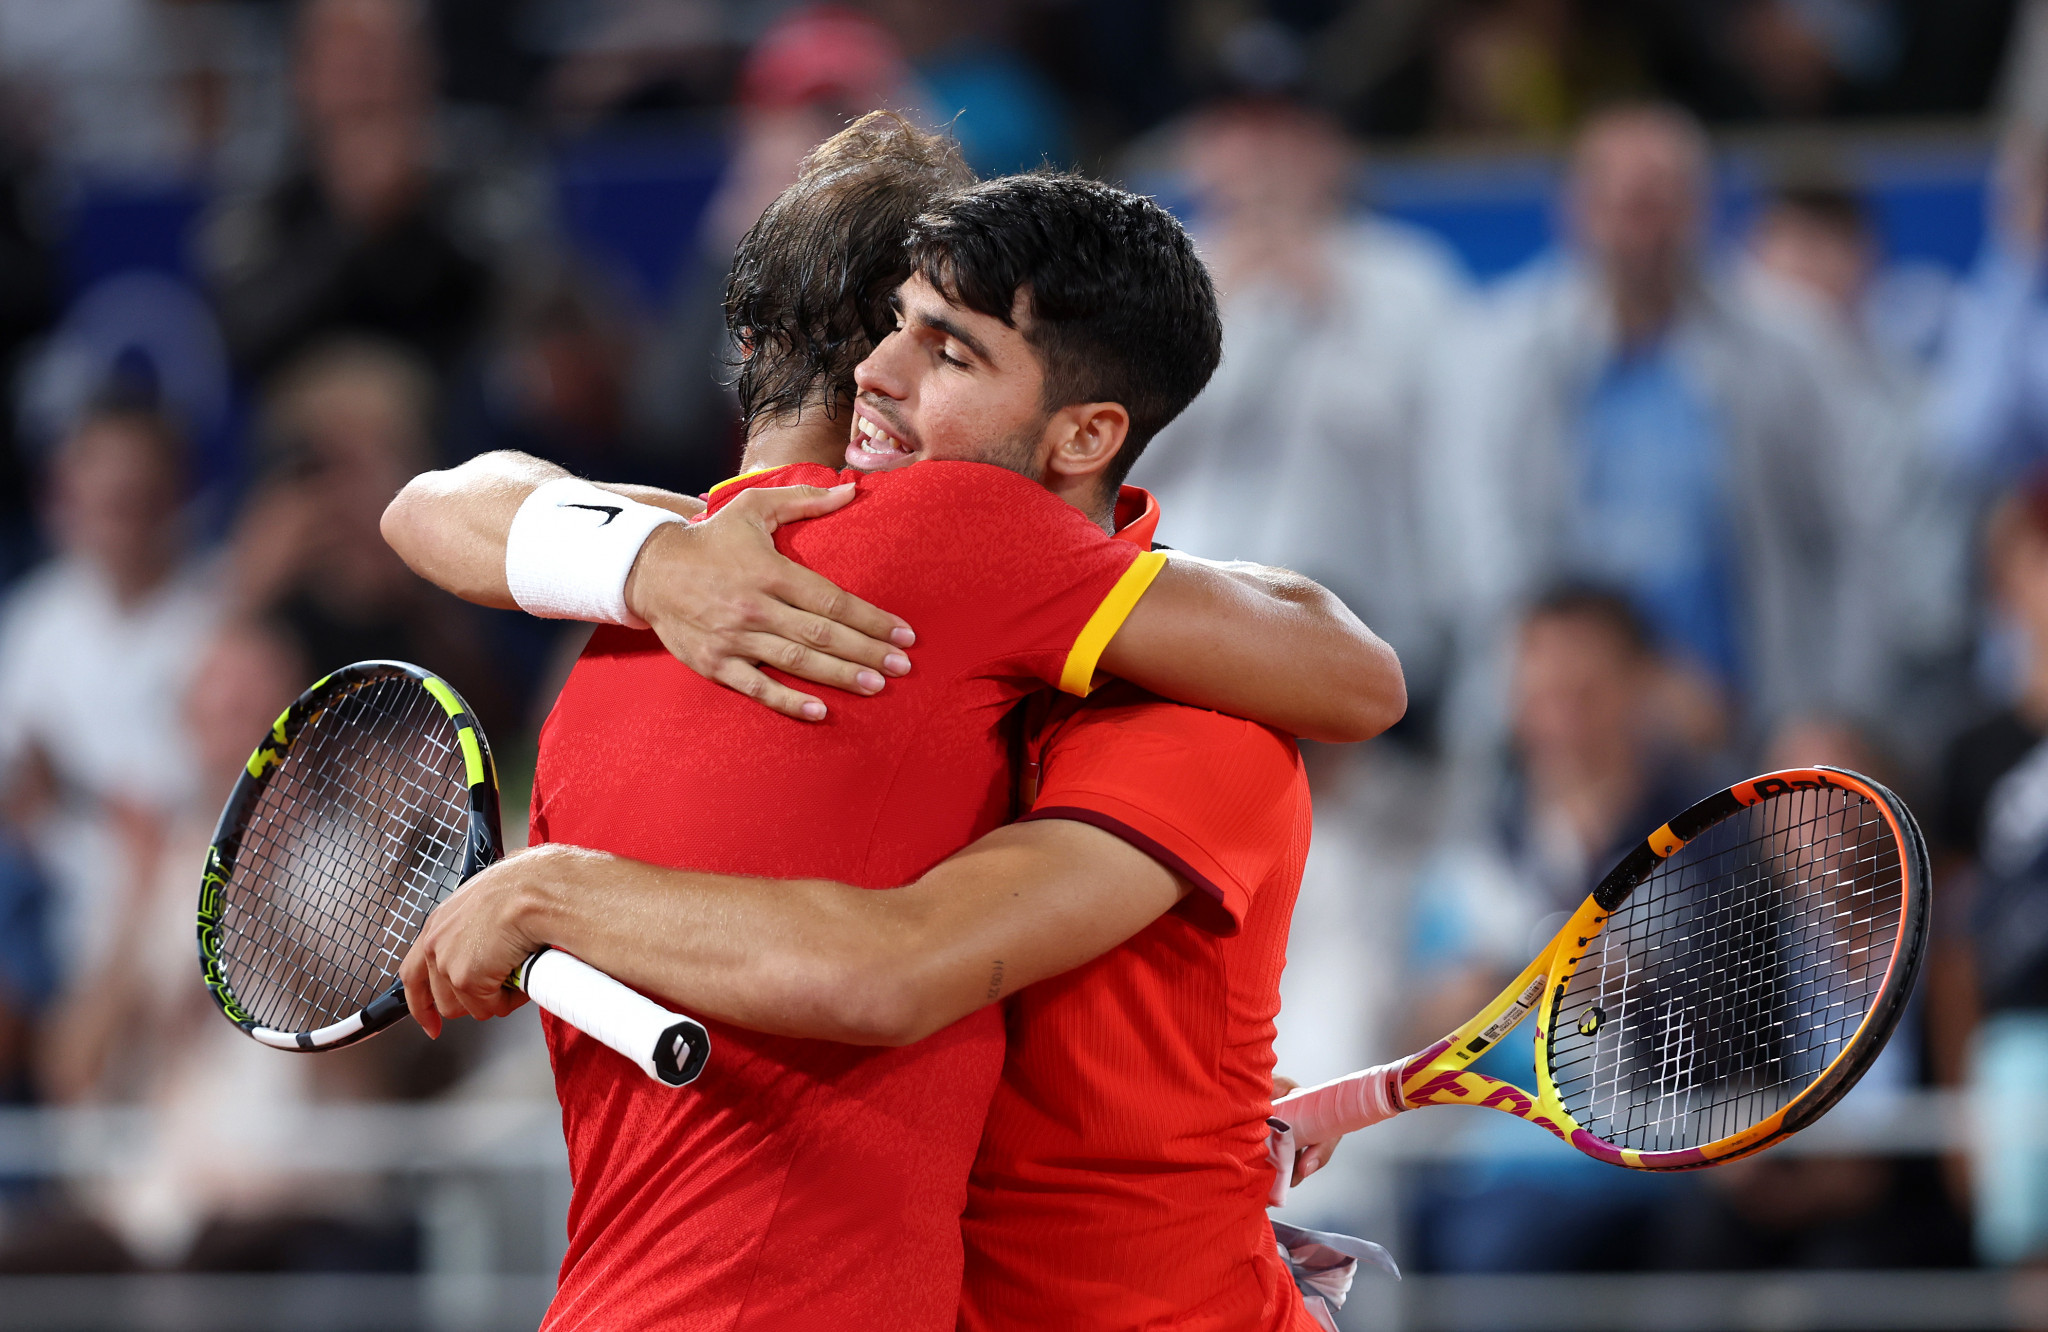 The Spanish dream team of Rafael Nadal and Carlos Alcaraz won the men's doubles again. GETTY IMAGES